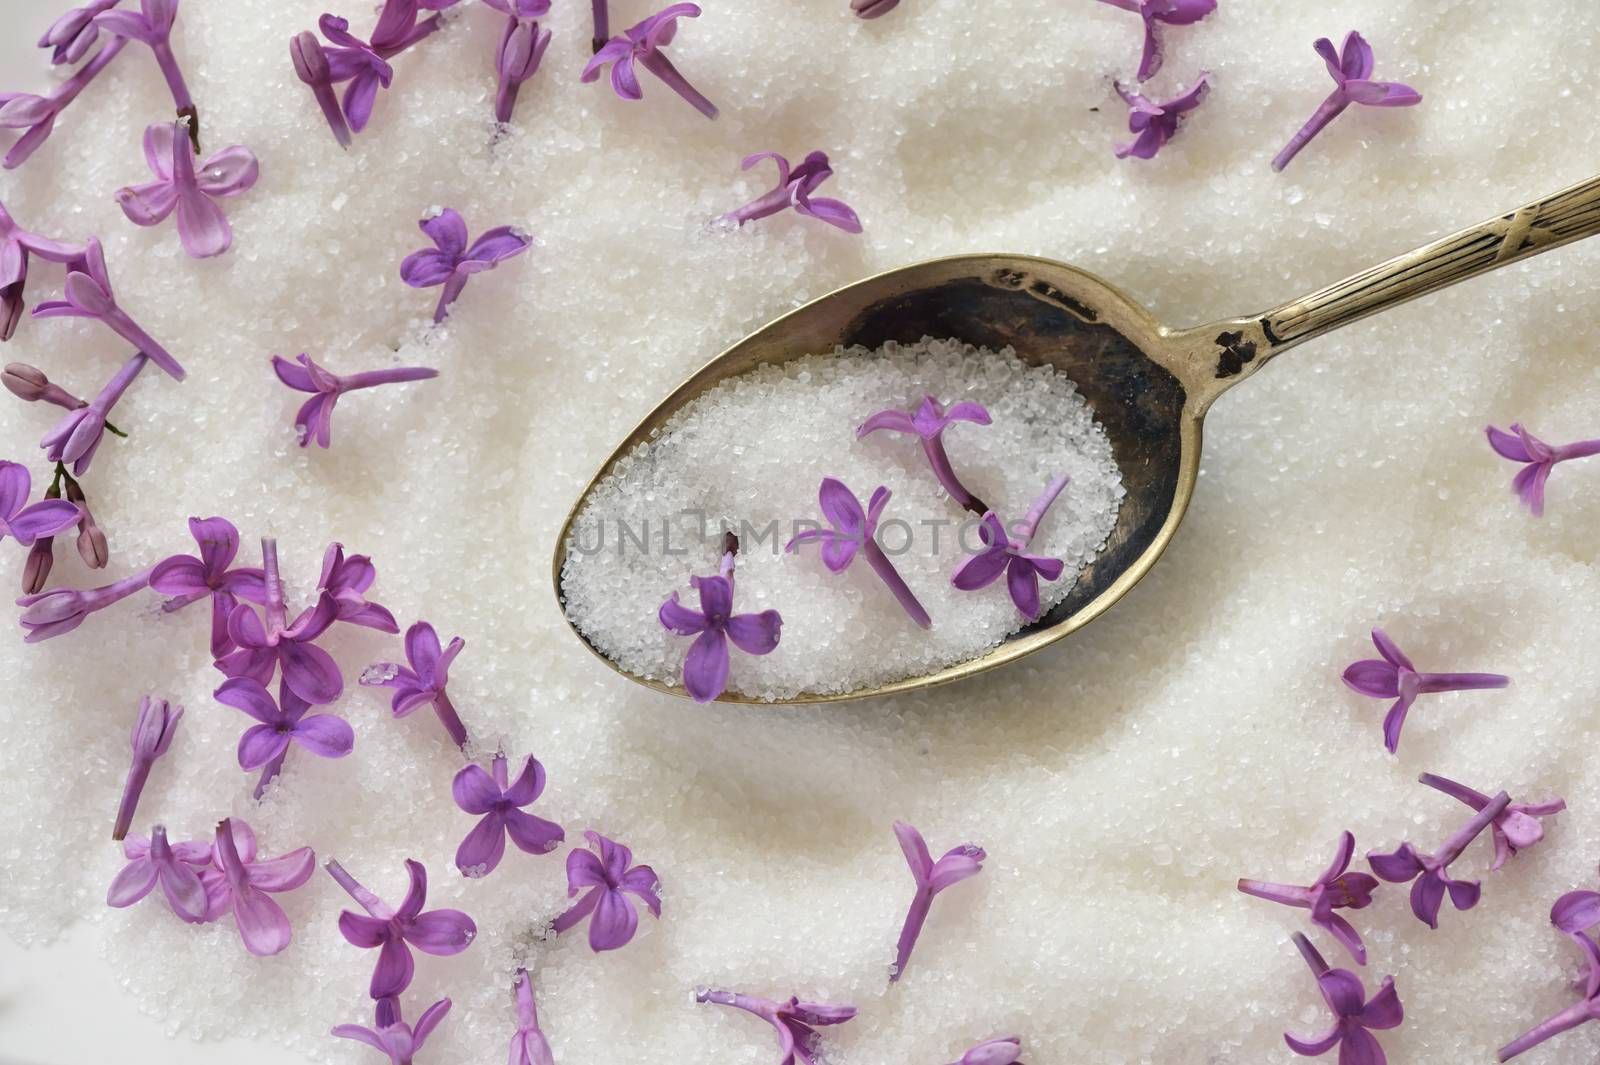 Lilac Sugar In Spoon And Plate  by mady70